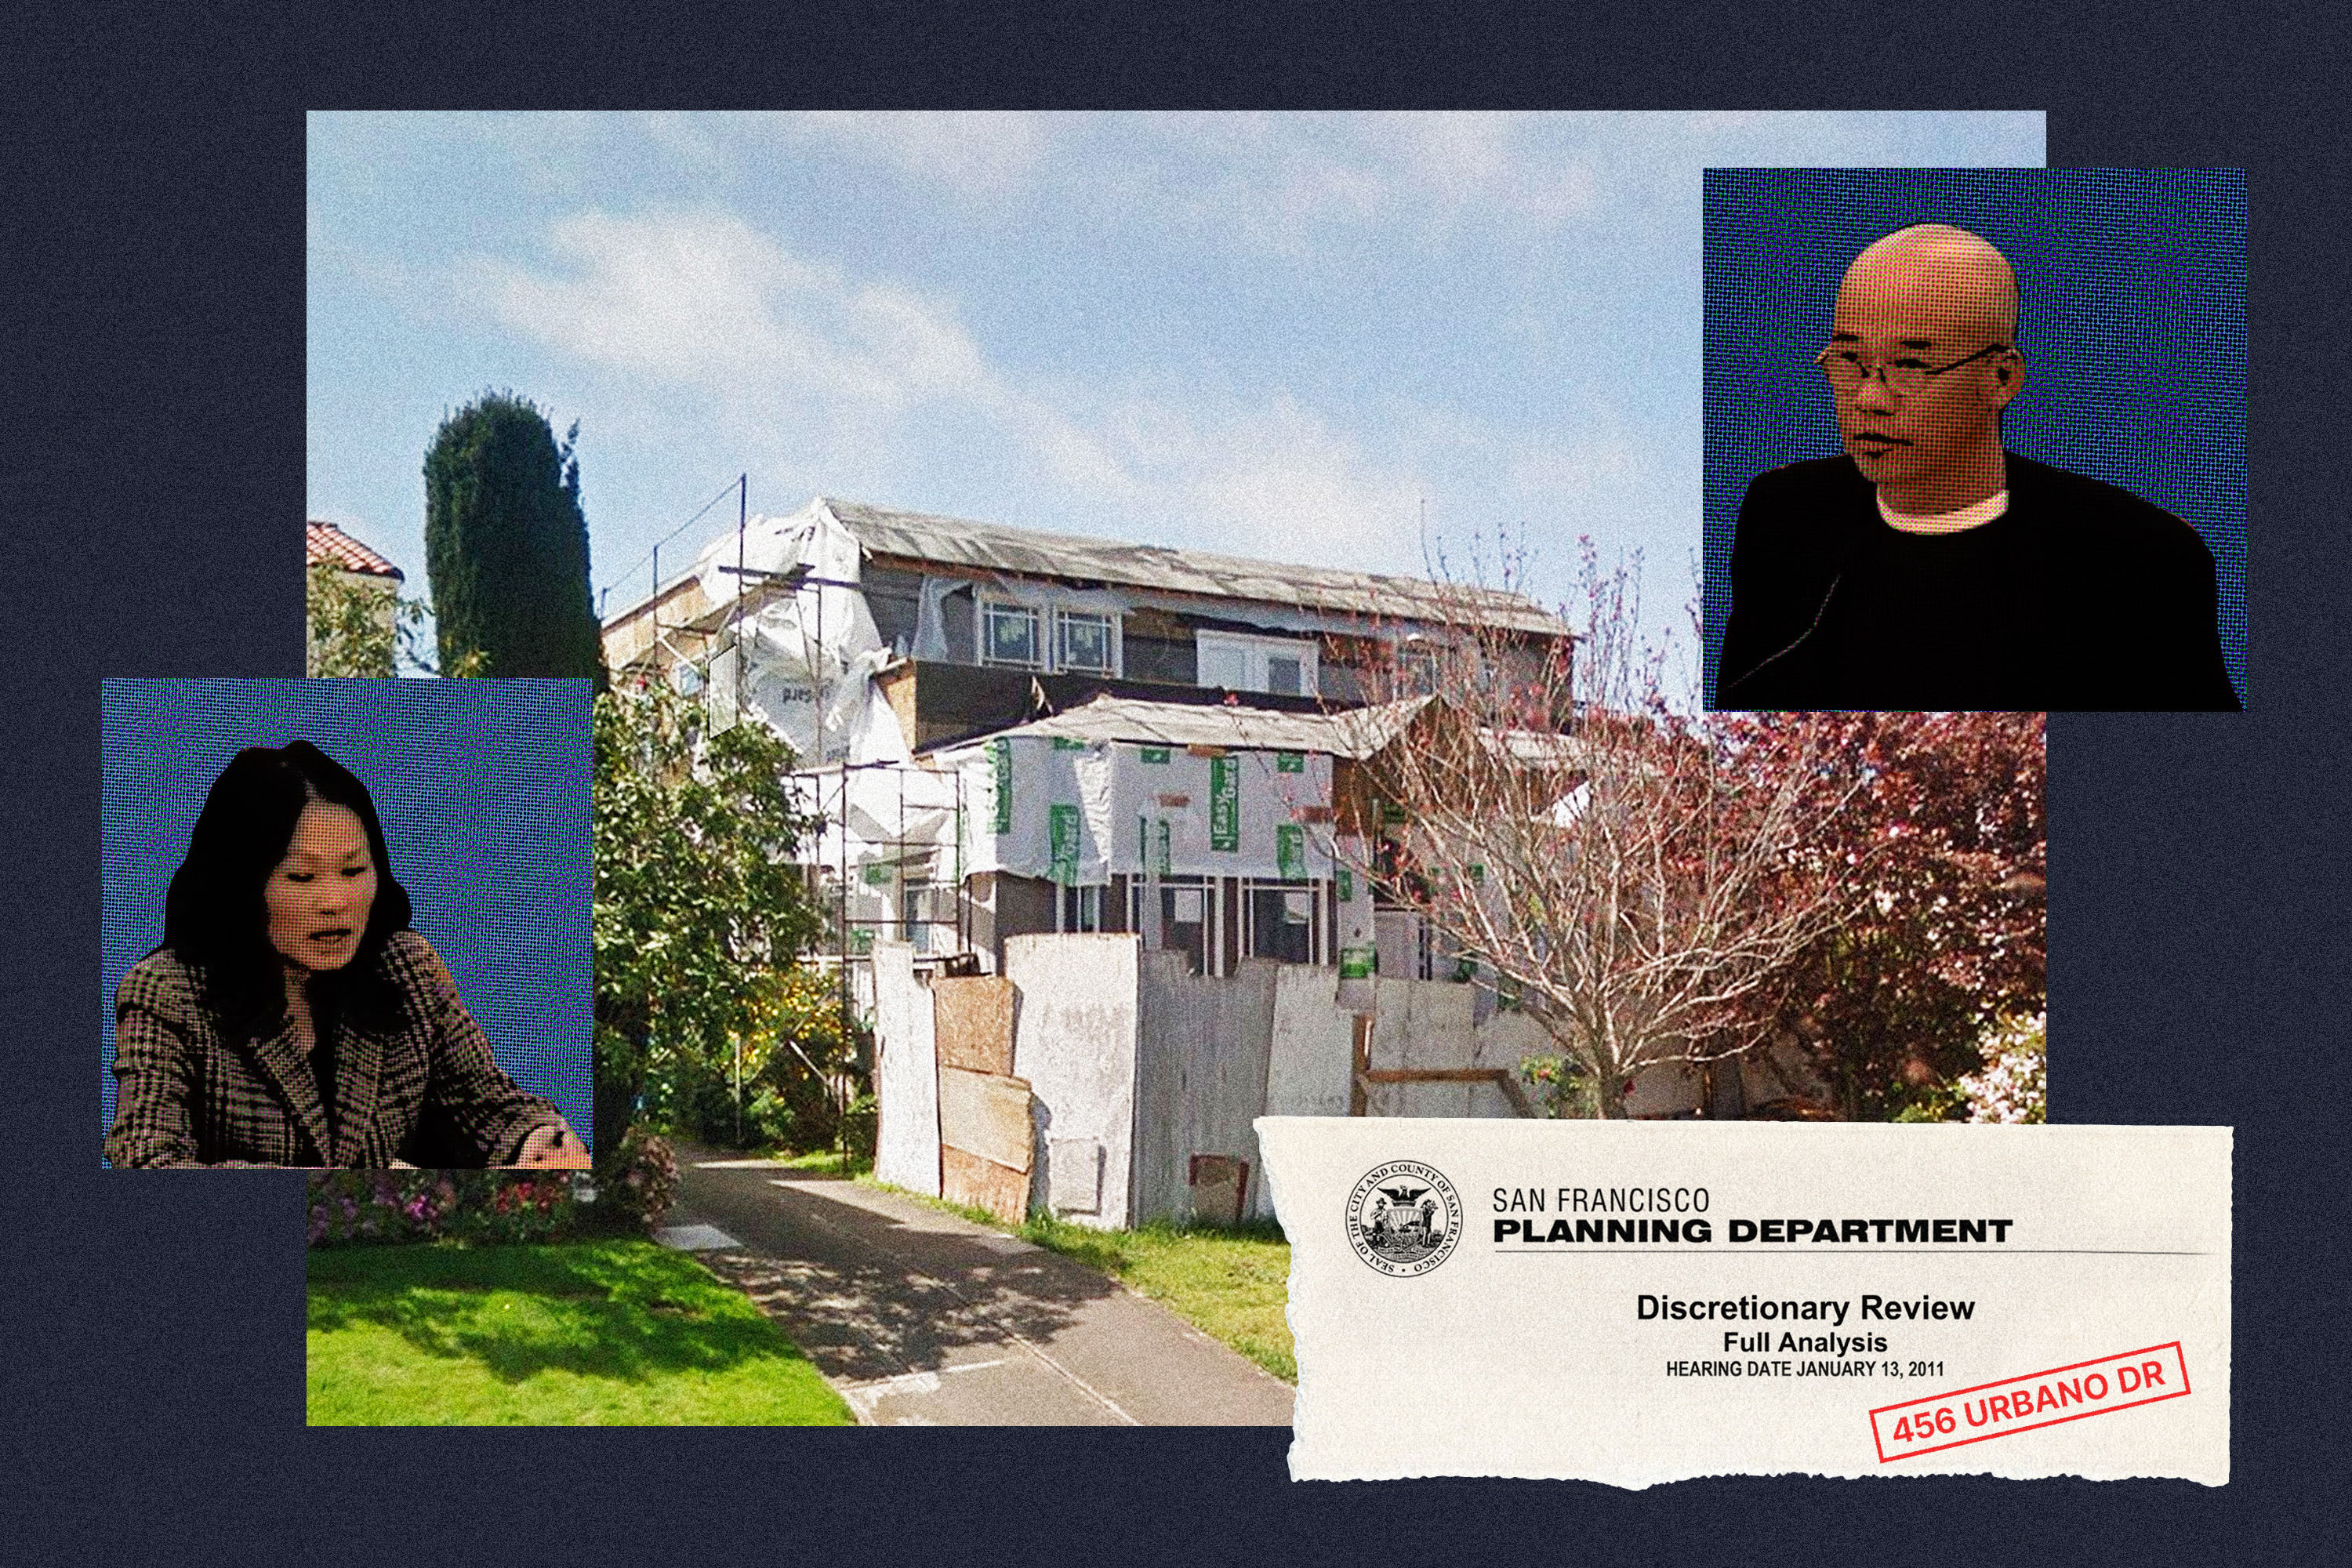 The collage shows a house under construction, two people in inset images, and a document from the San Francisco Planning Department.